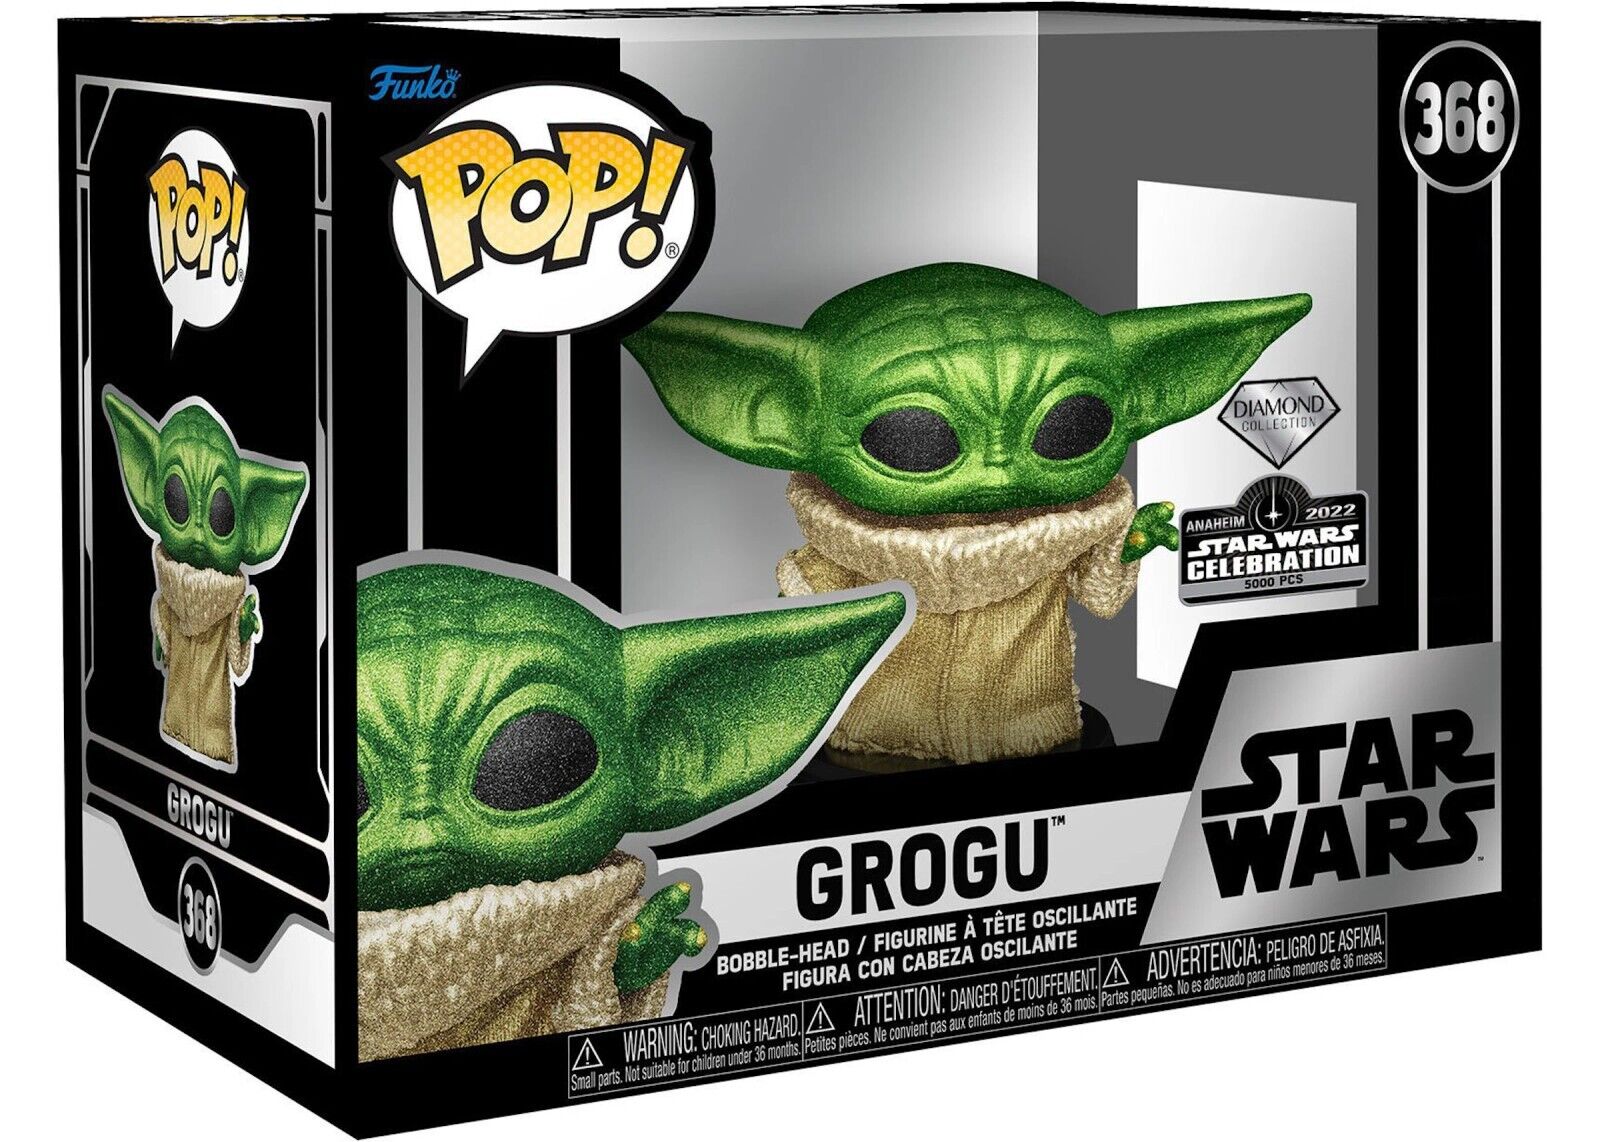 Funko #368 Star Wars Grogu Diamond Collection 2022 Swc Exclusive Limited Edition